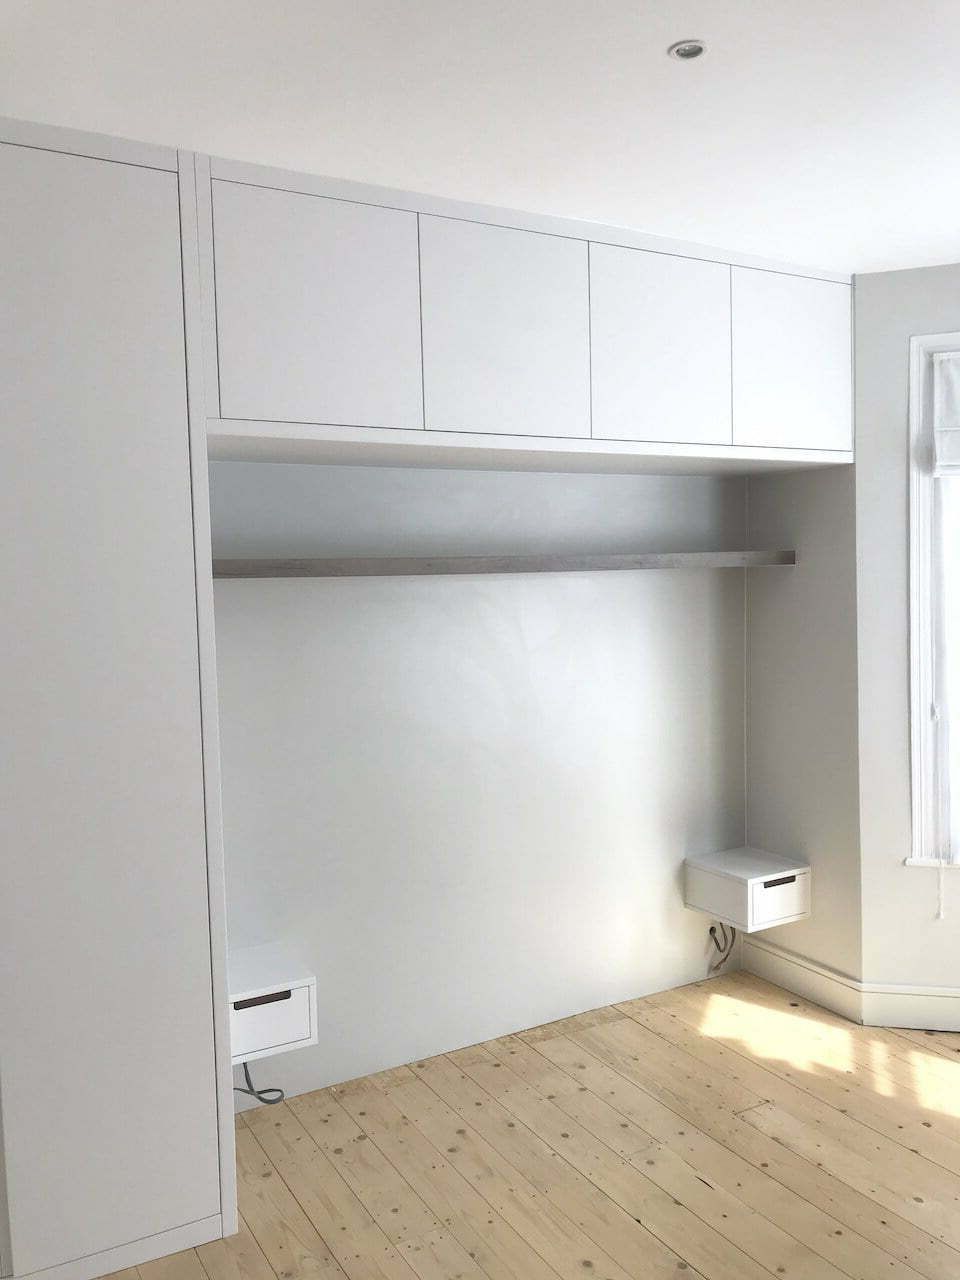 Overbed Fitted Wardrobes And Storage Units, Bespoke Overhead Storage Pertaining To Over Bed Wardrobes Units (Gallery 11 of 20)